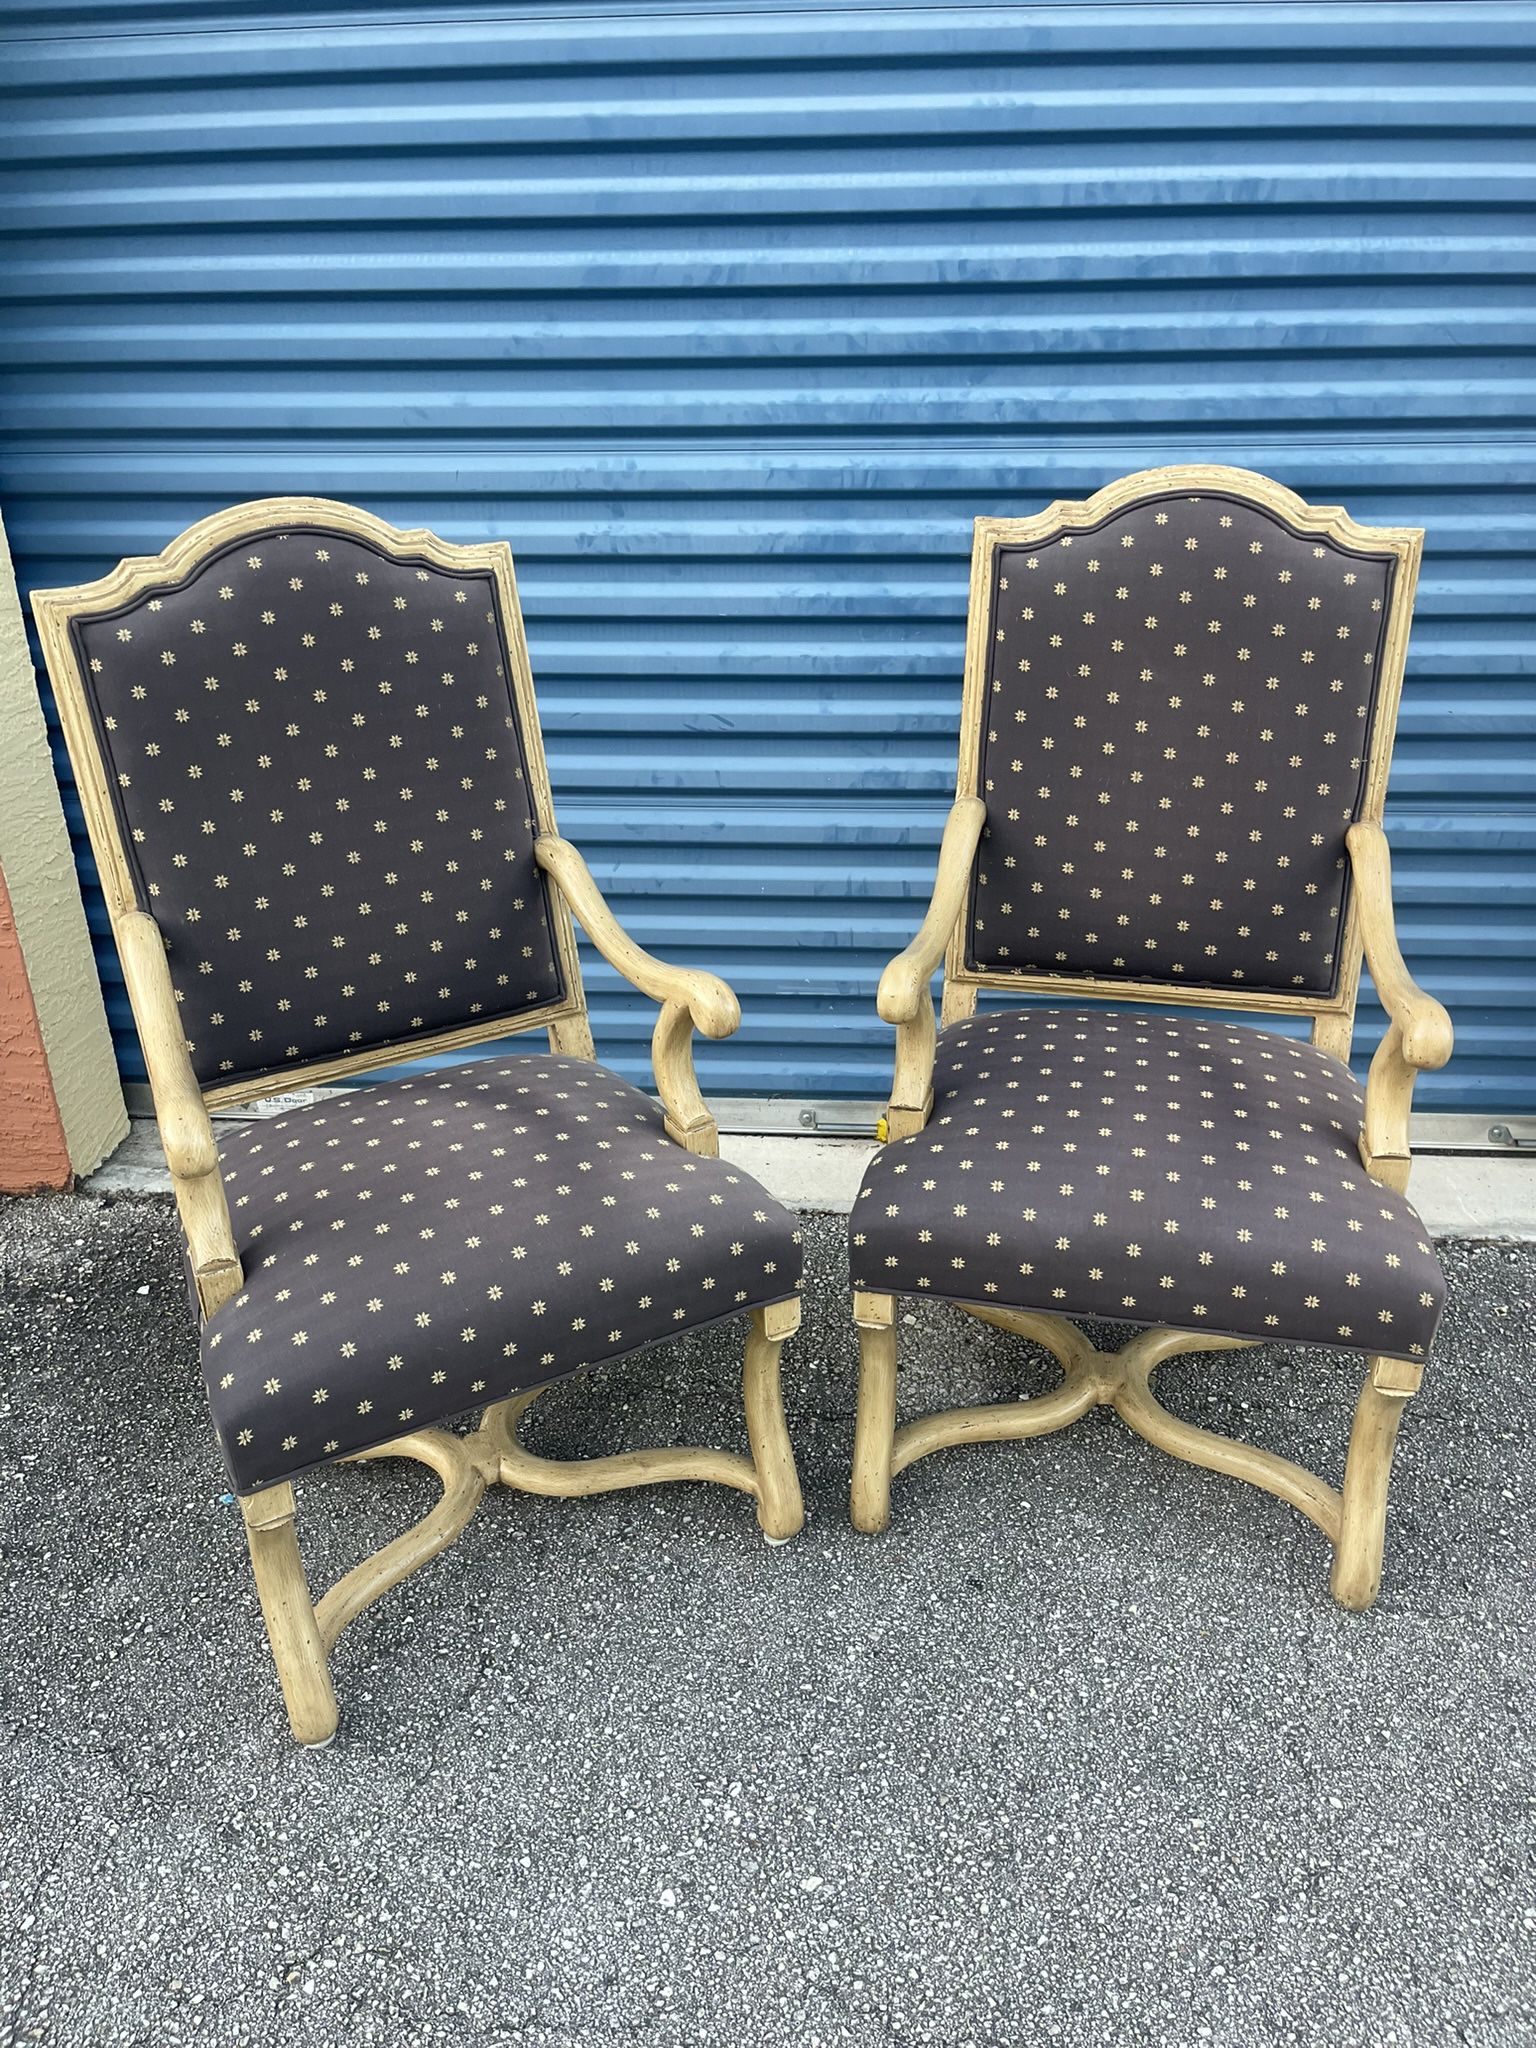 Vintage Accent Chairs $35